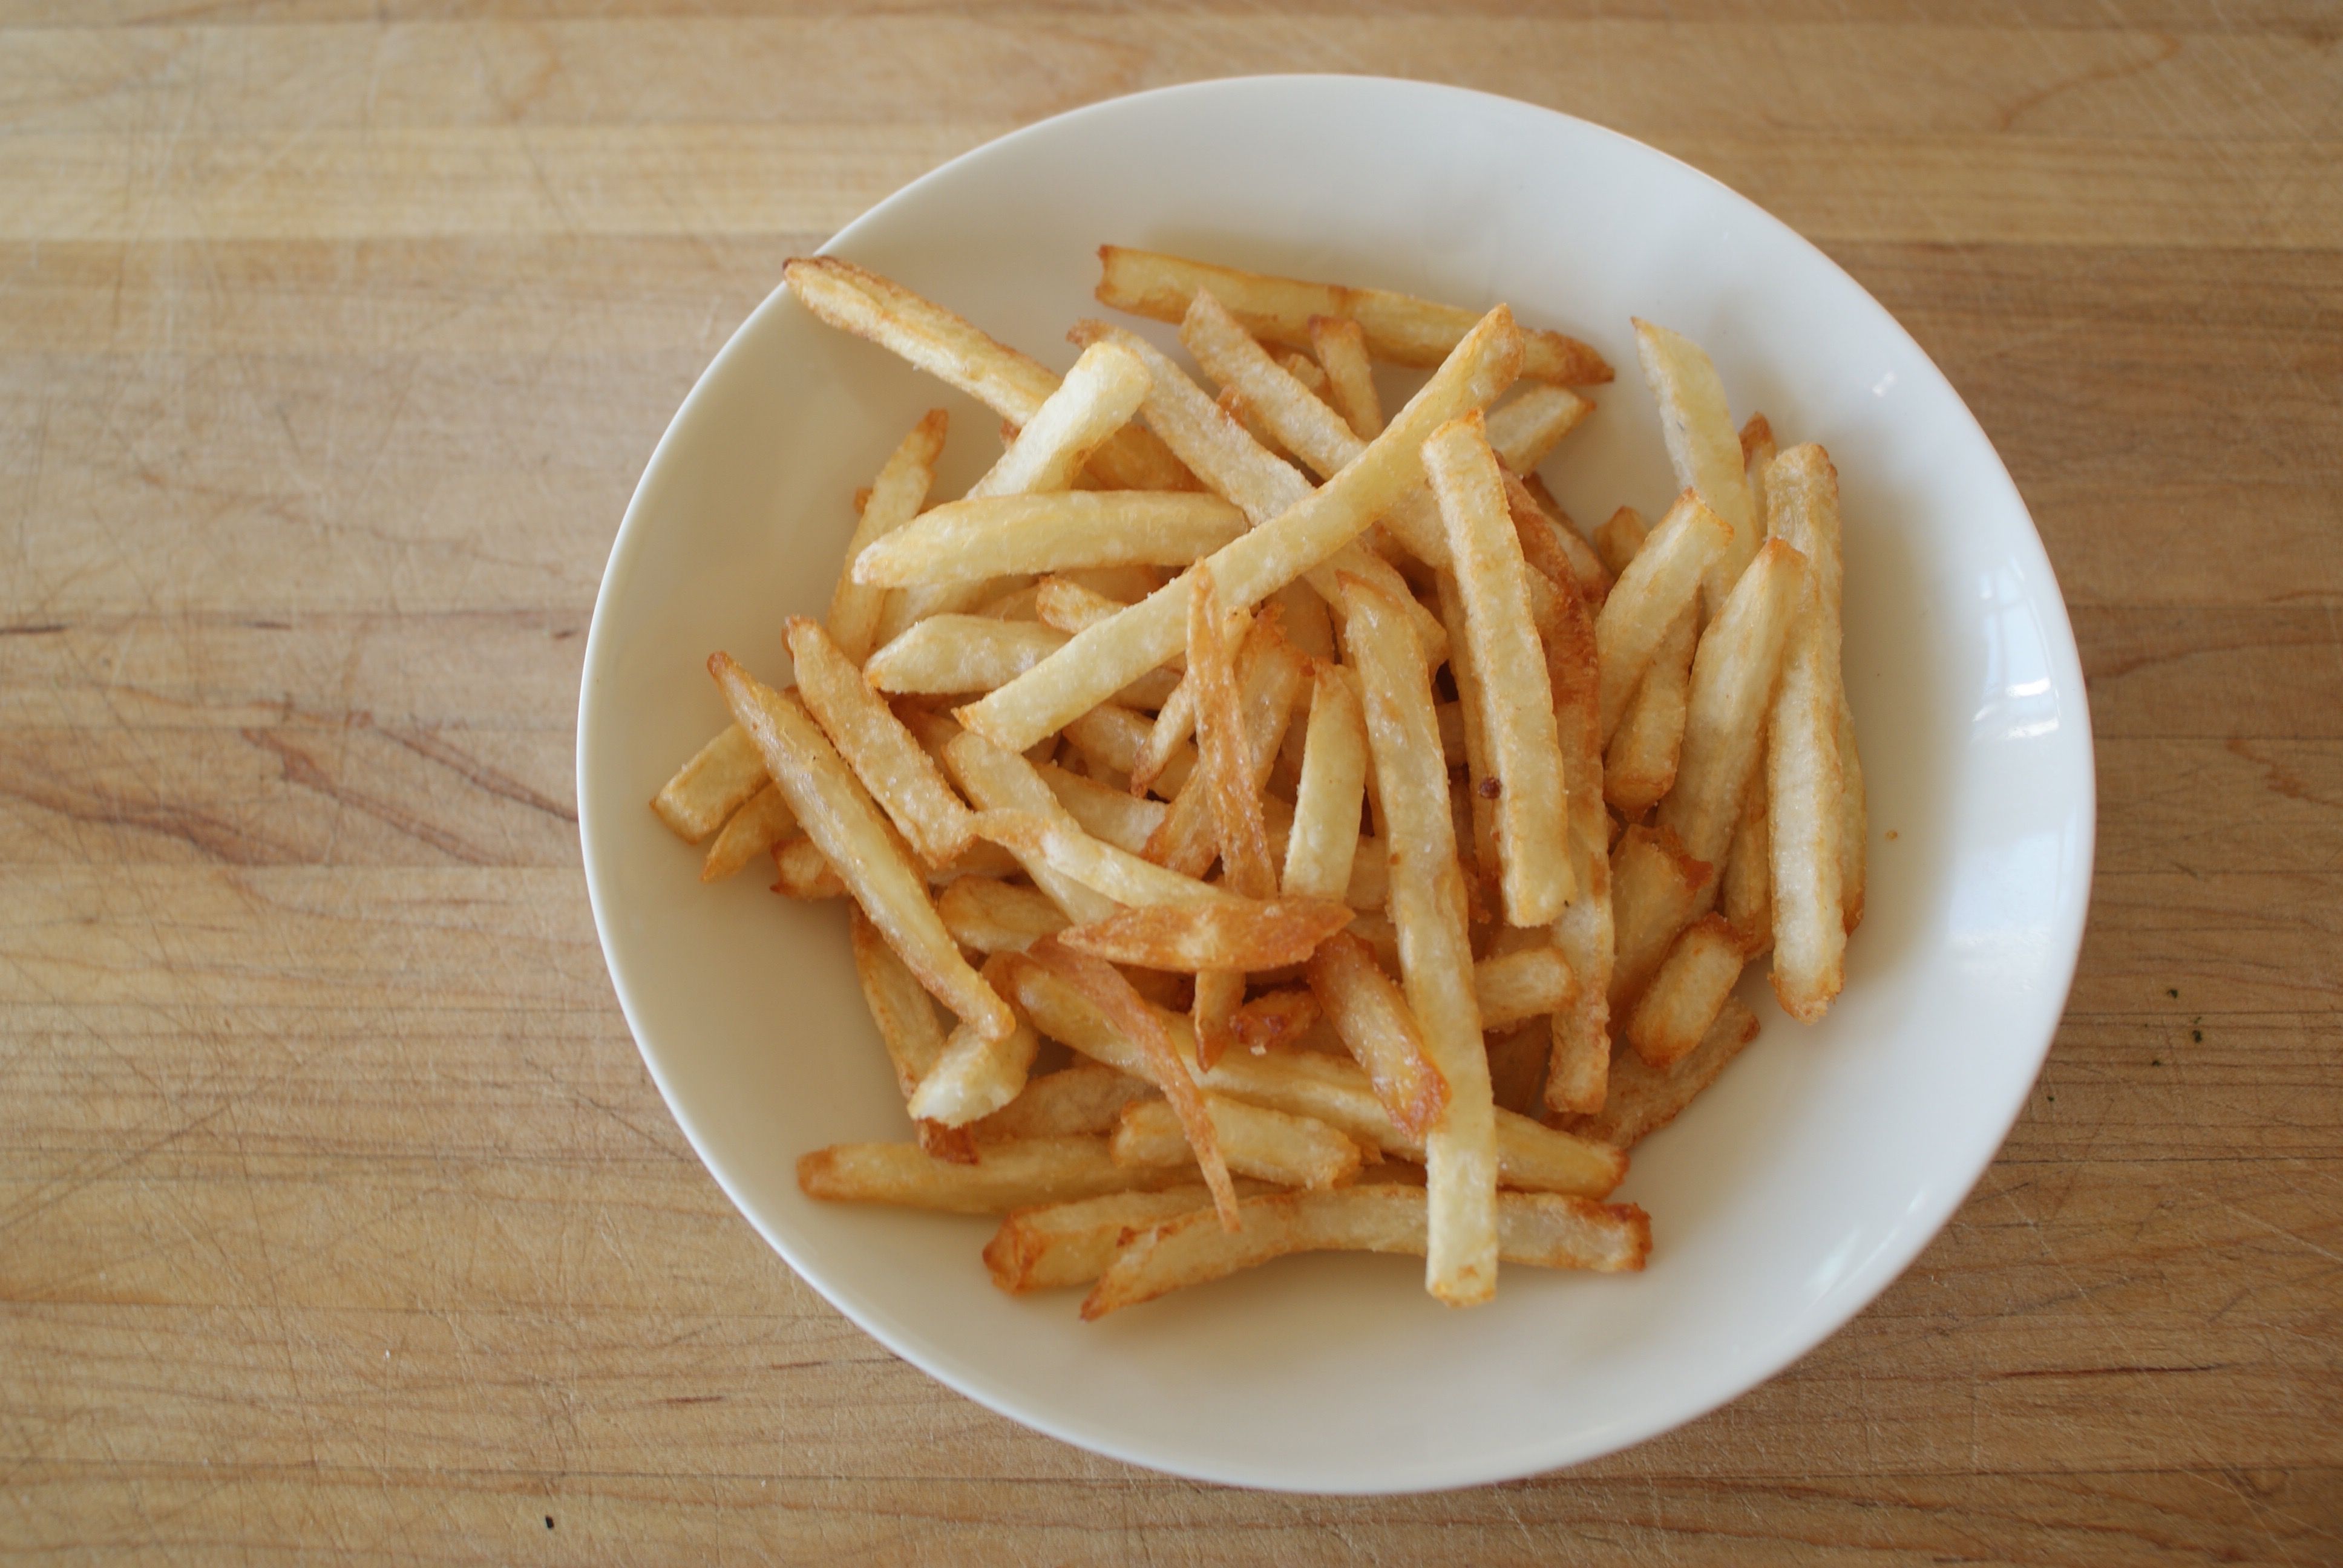 How to Make Homemade French Fries - Recipe with Photos